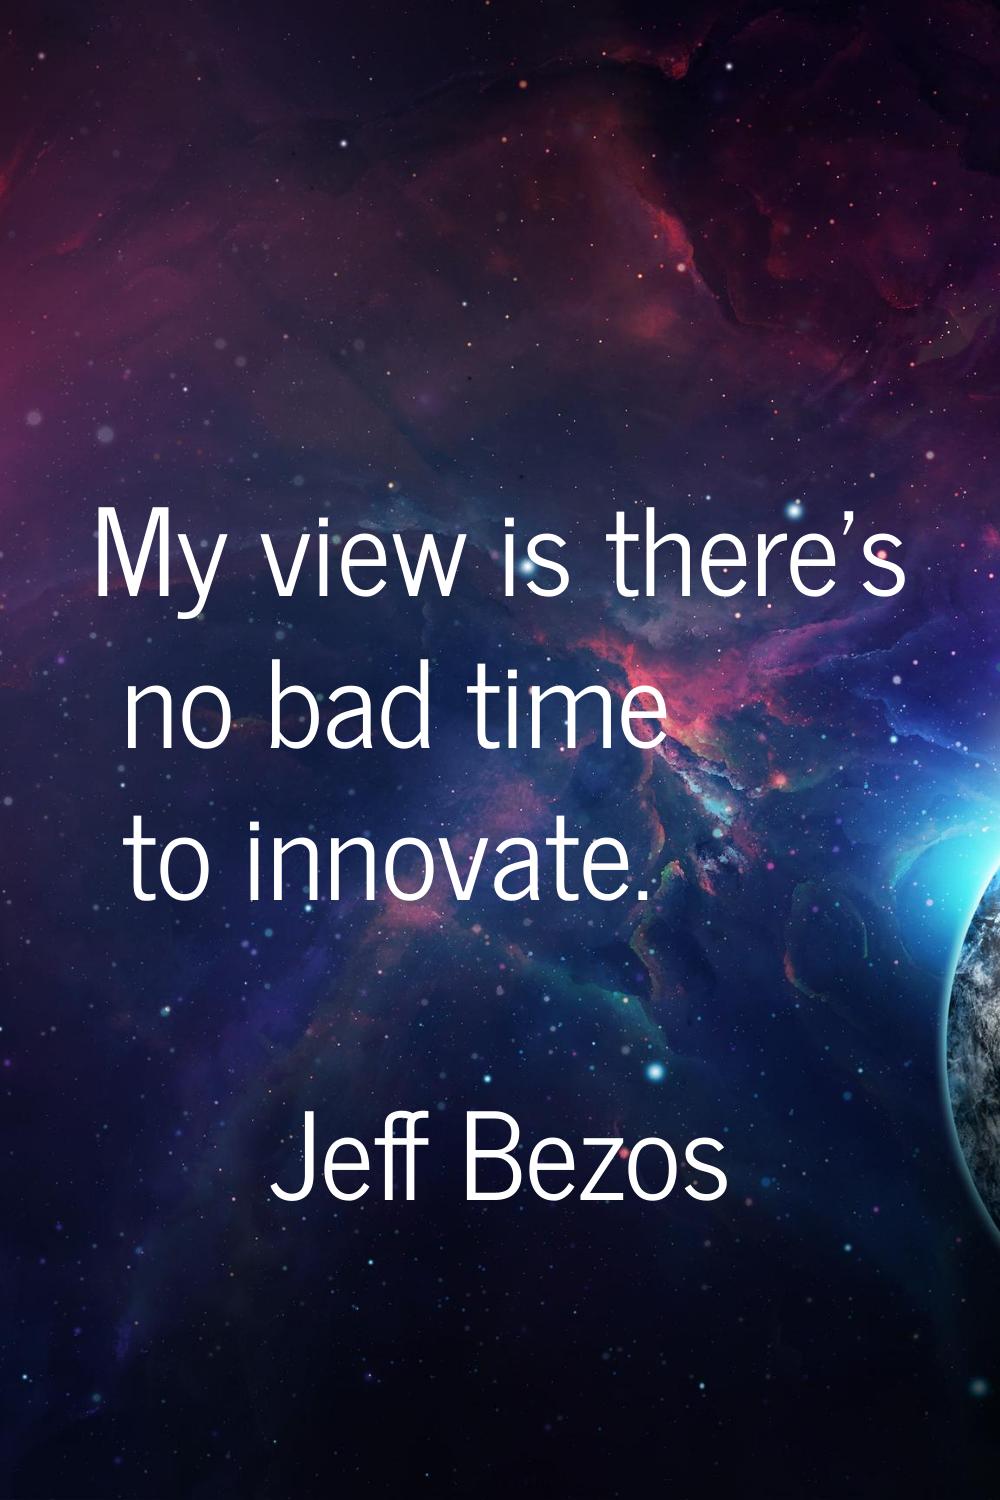 My view is there's no bad time to innovate.